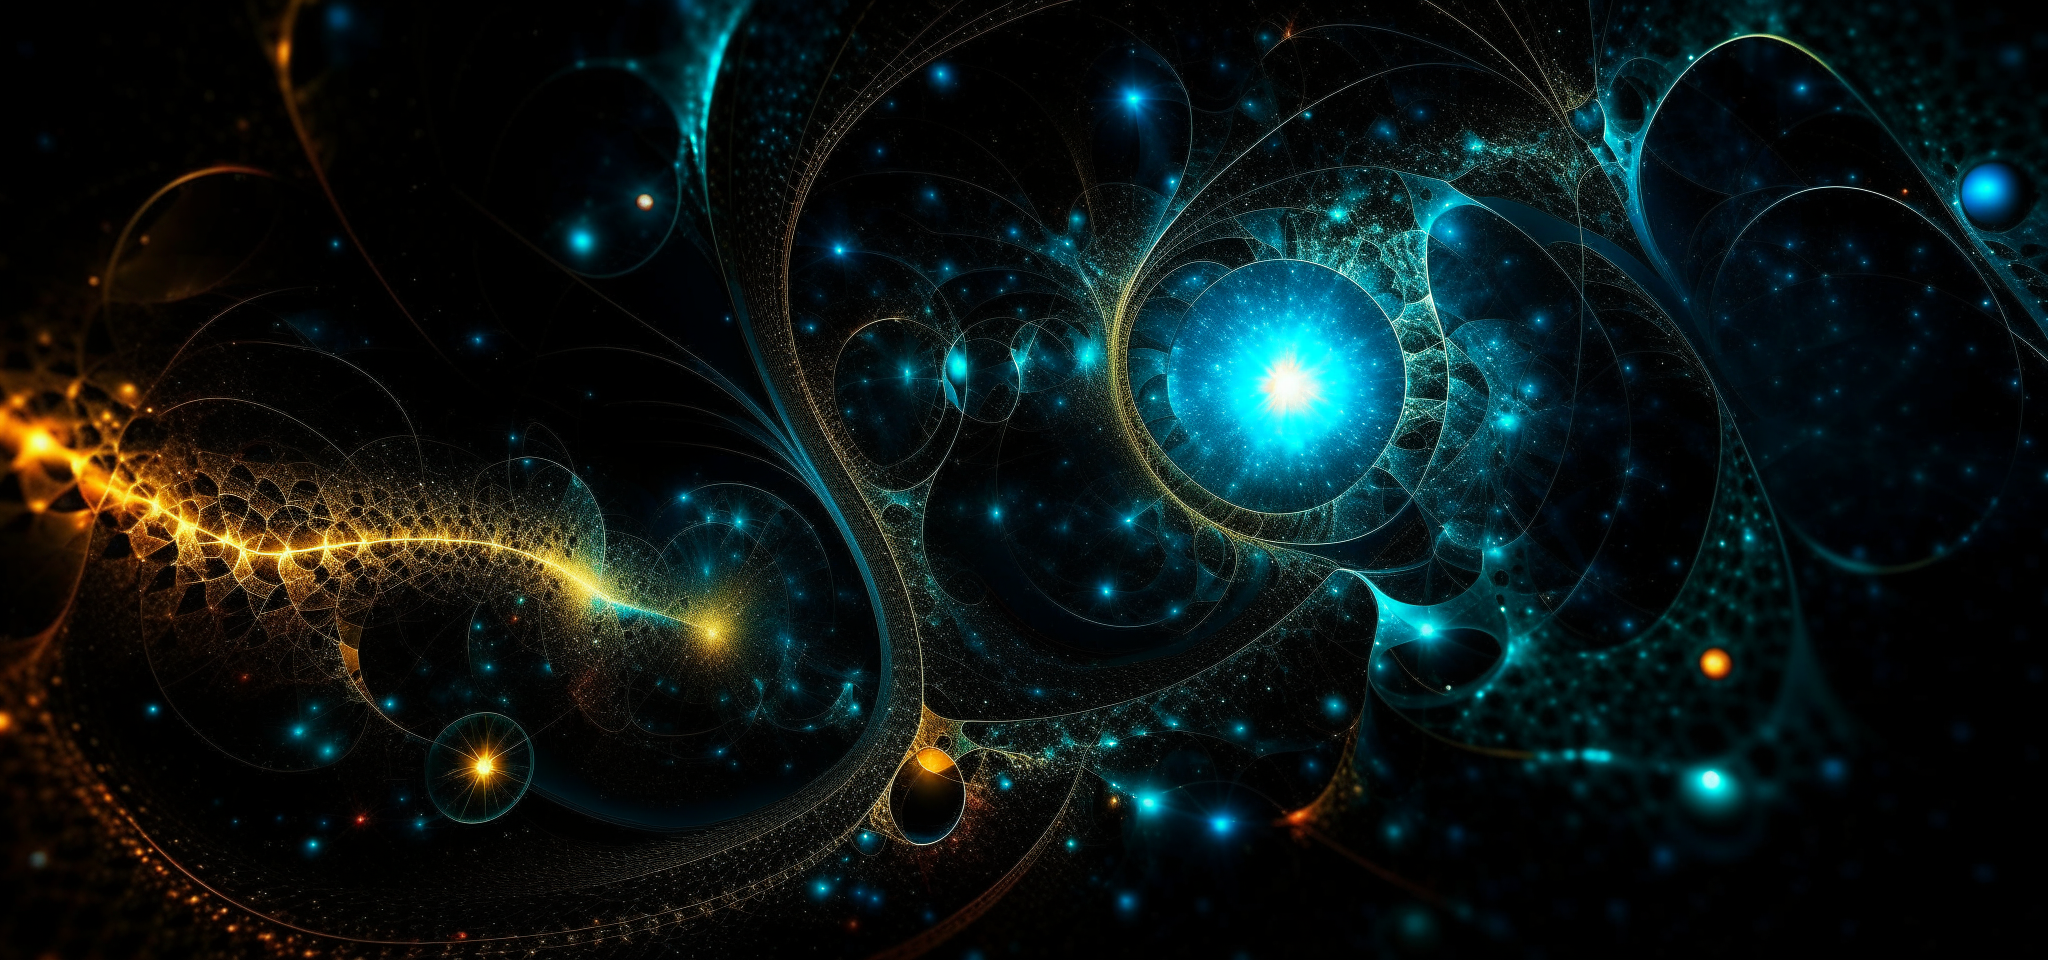 post background, dark theme, fractals, abstract, space, 